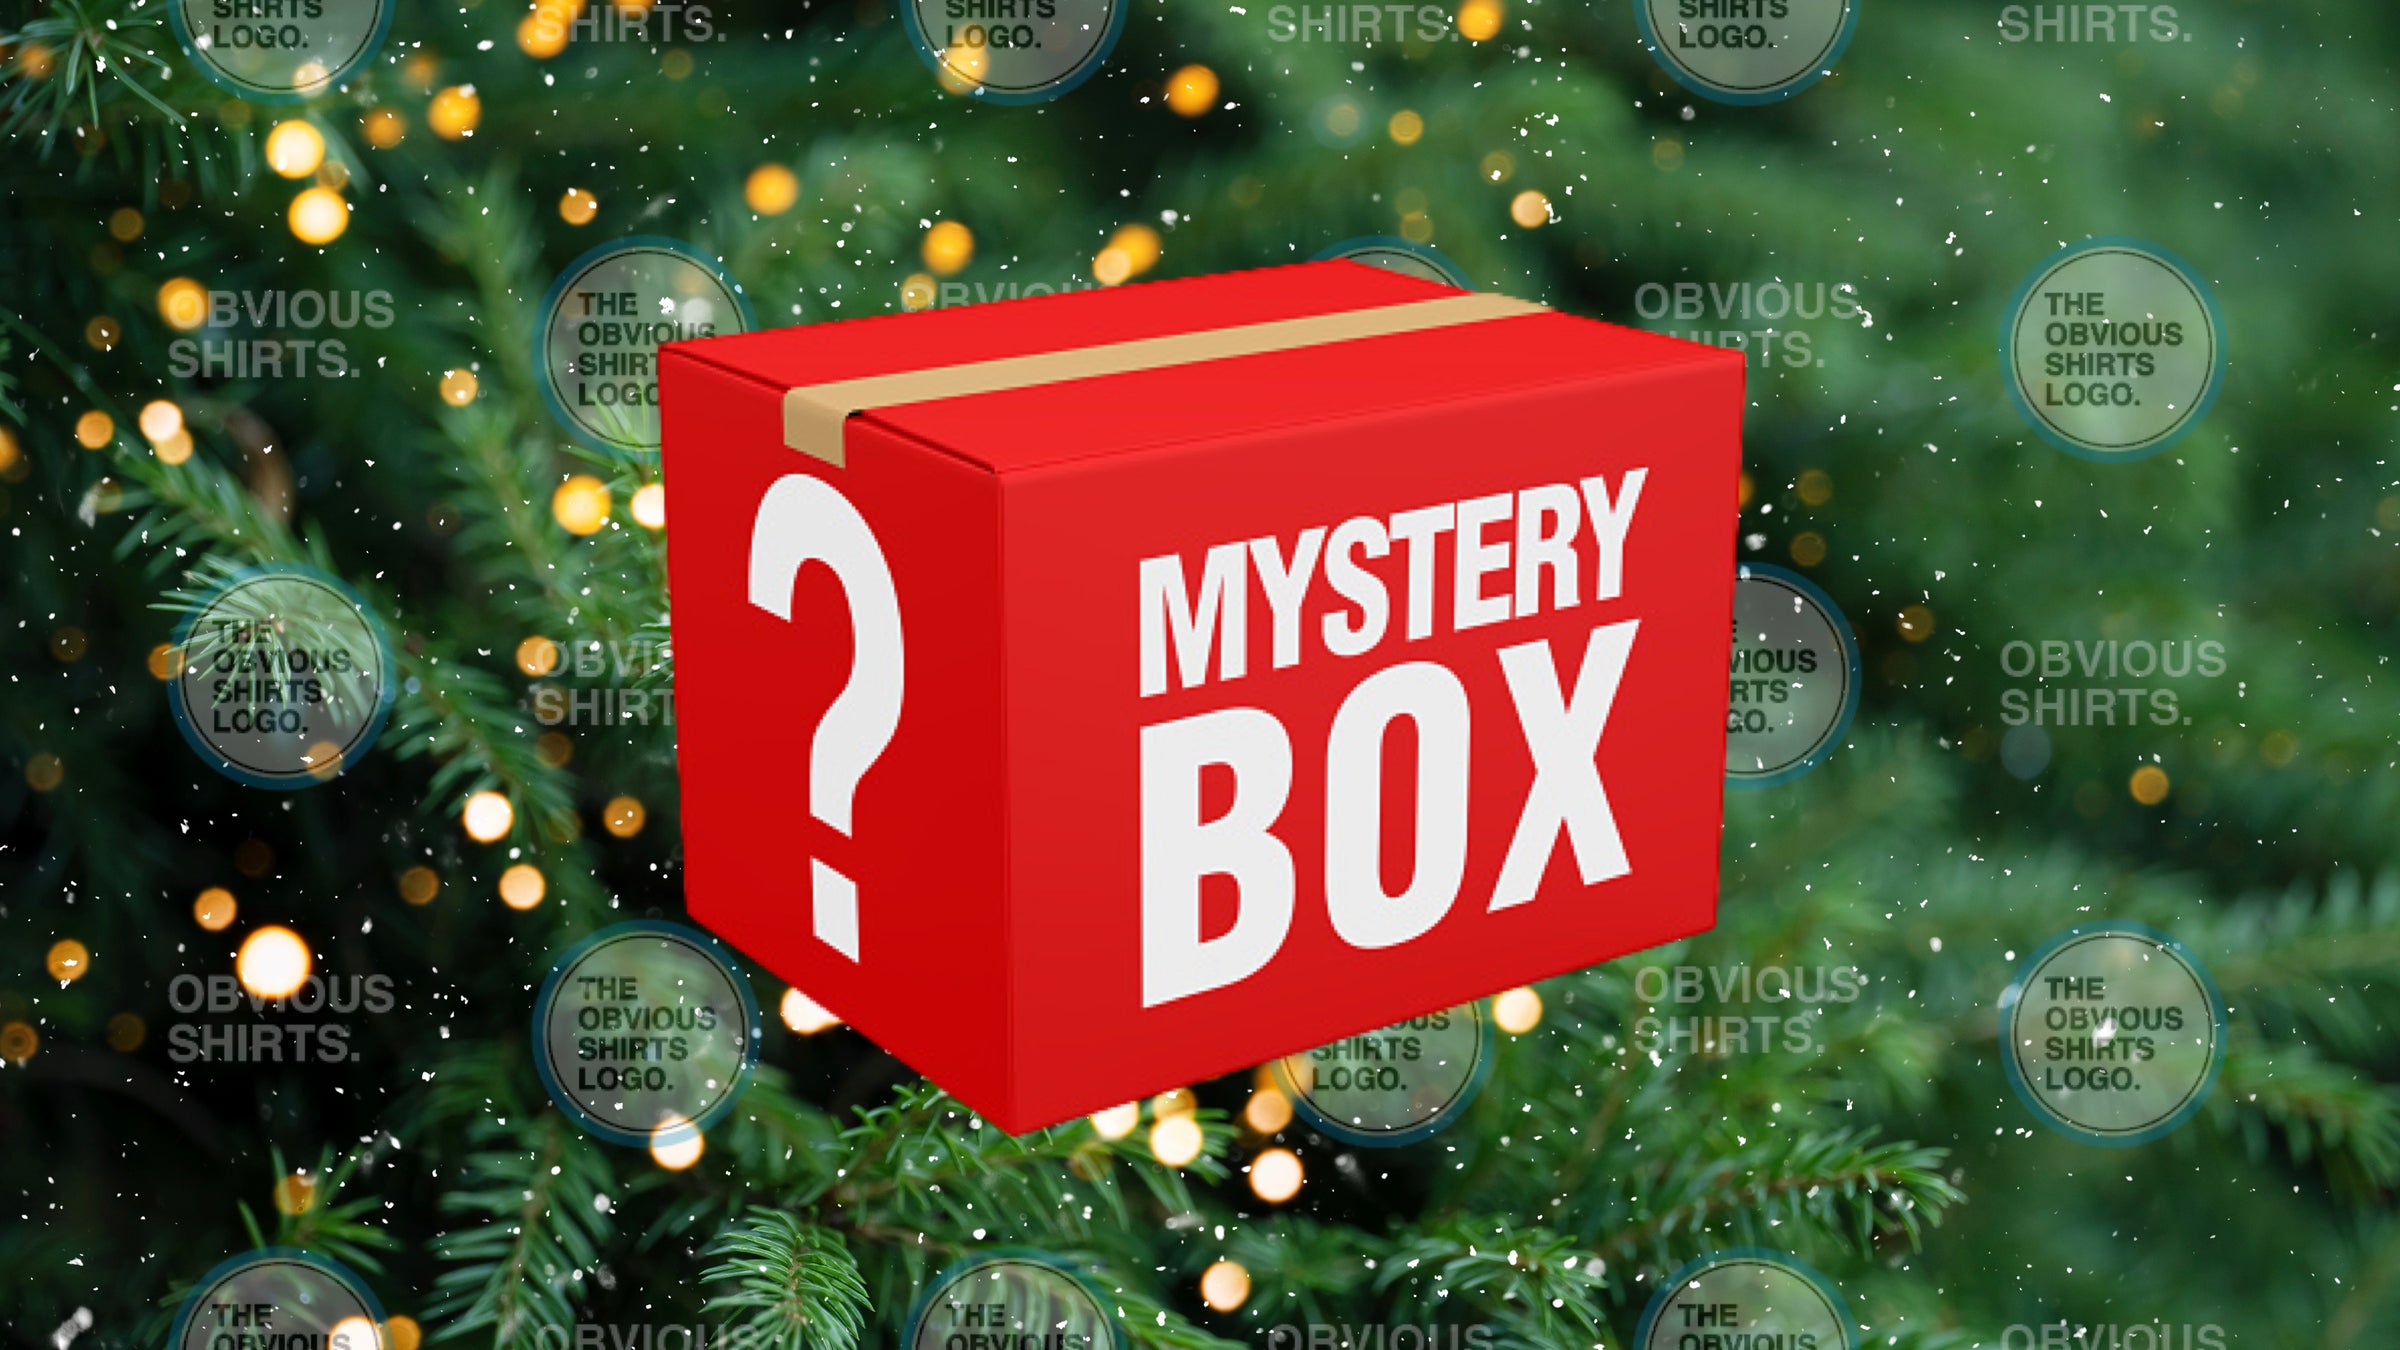 MYSTERY BOX | OBVIOUS SHIRTS.